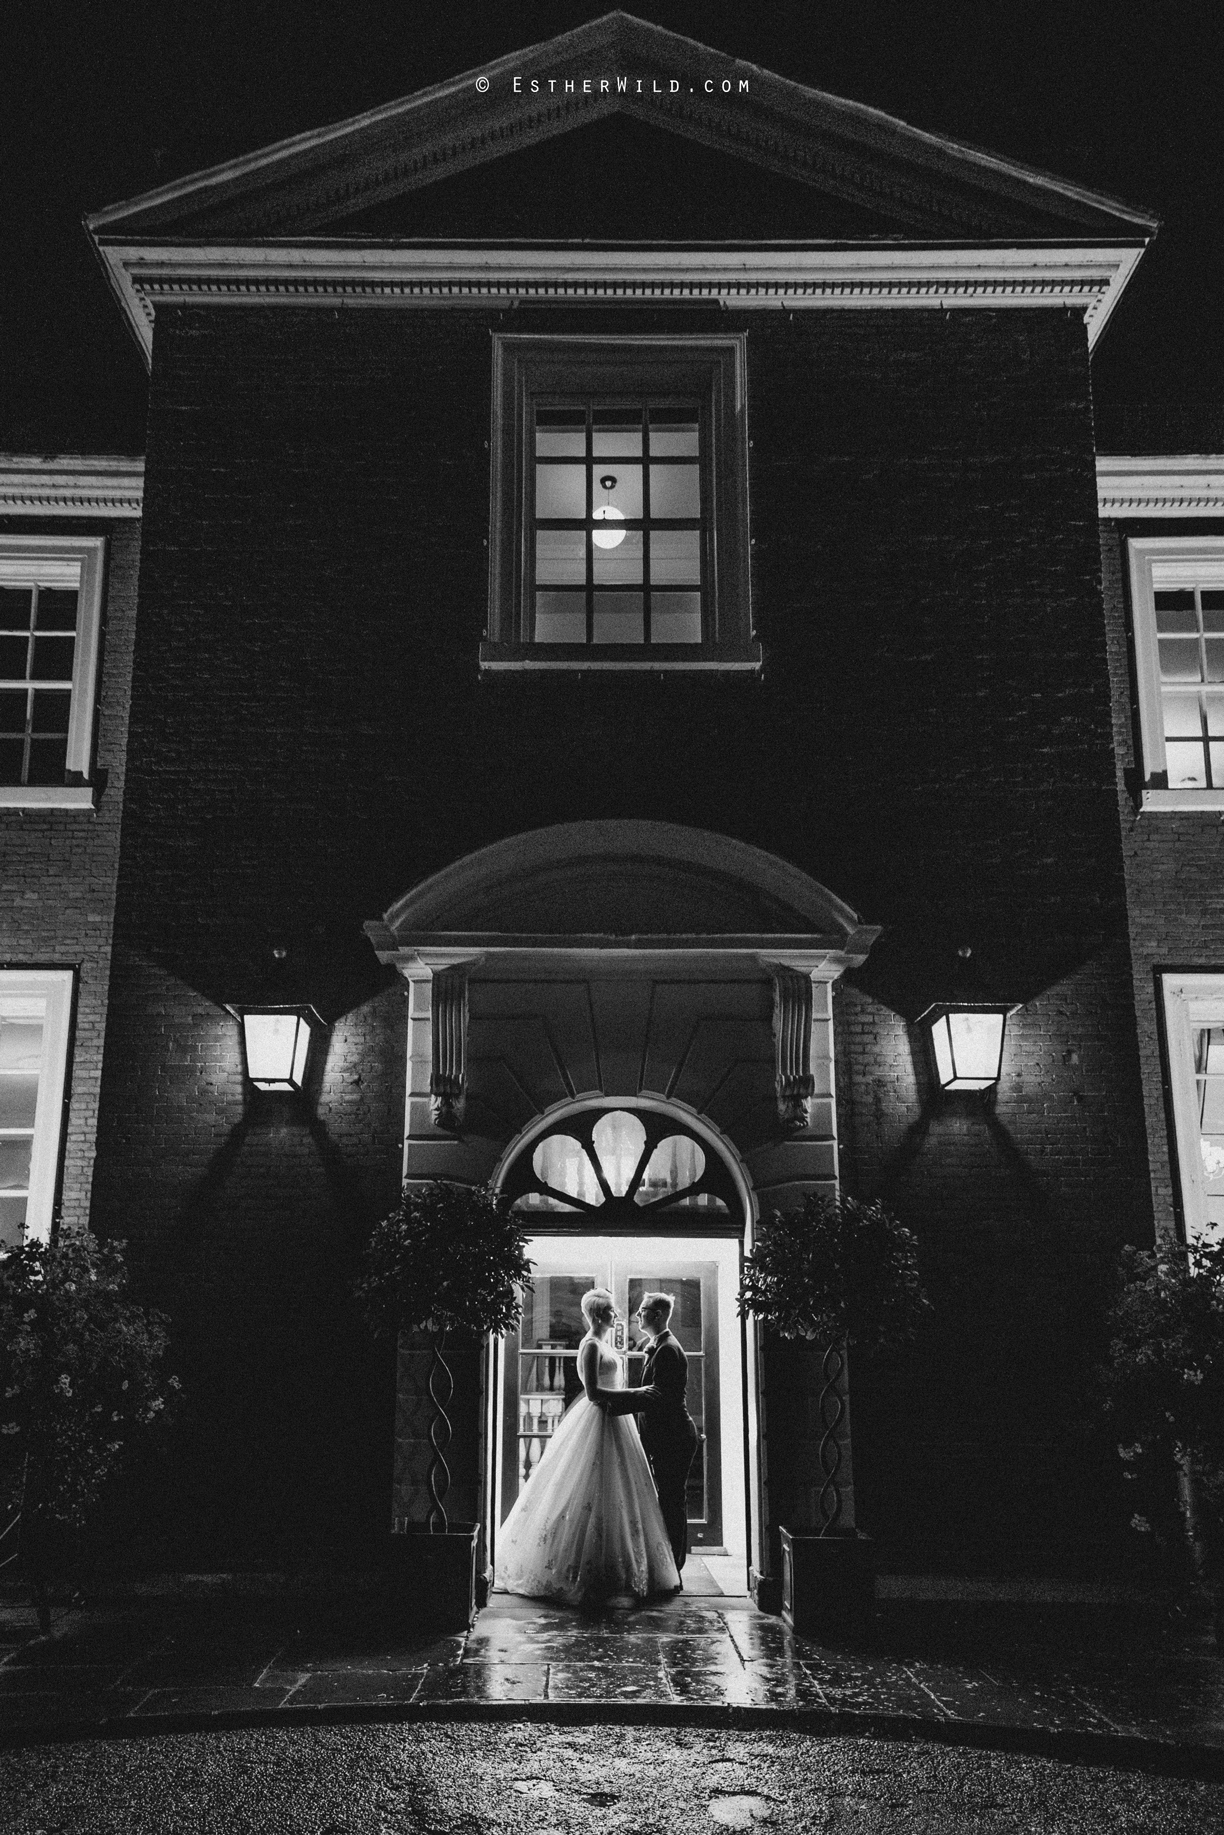 Norwich_Assembly_House_Wedding_Esther_Wild_Photographer_IMG_4792-1.jpg